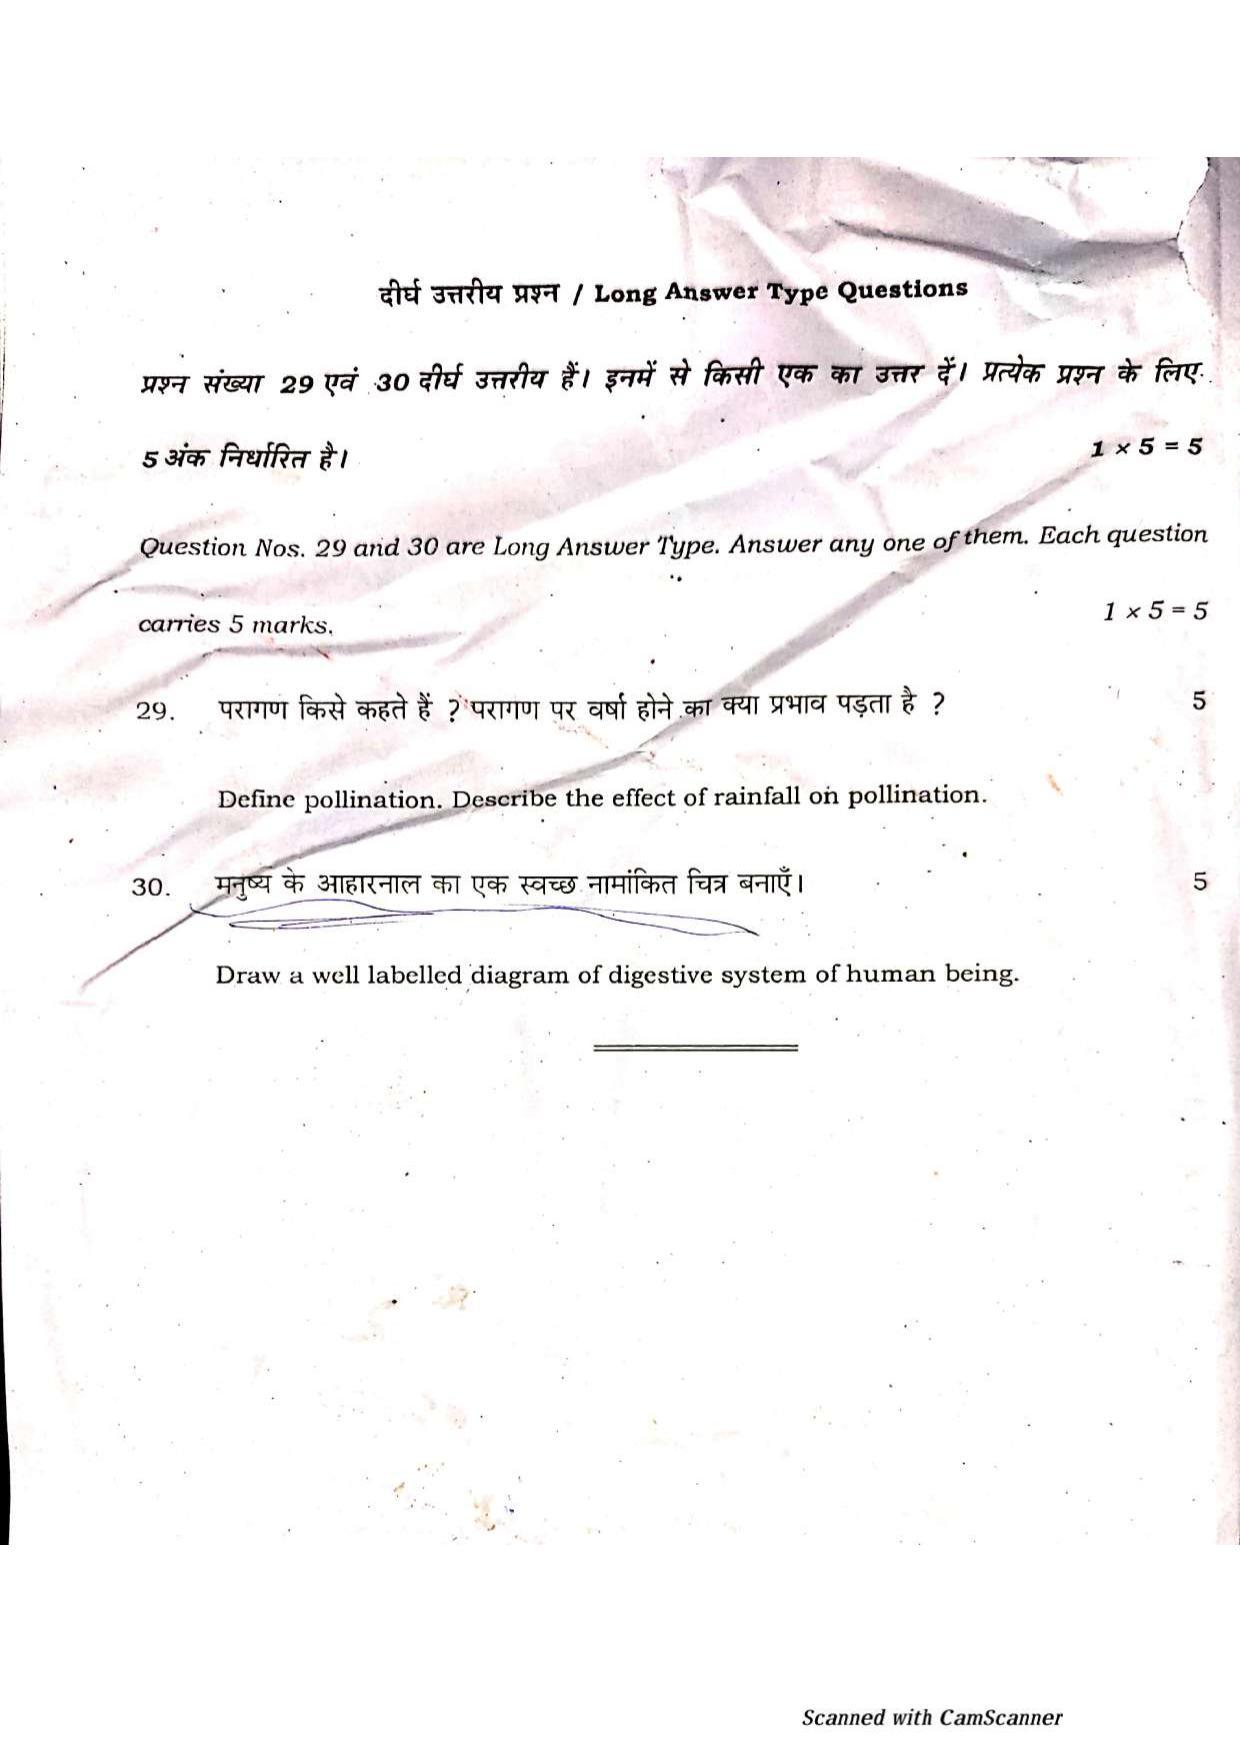 Bihar Board Class 10 Science 2021 (2nd Sitting) Question Paper - Page 42